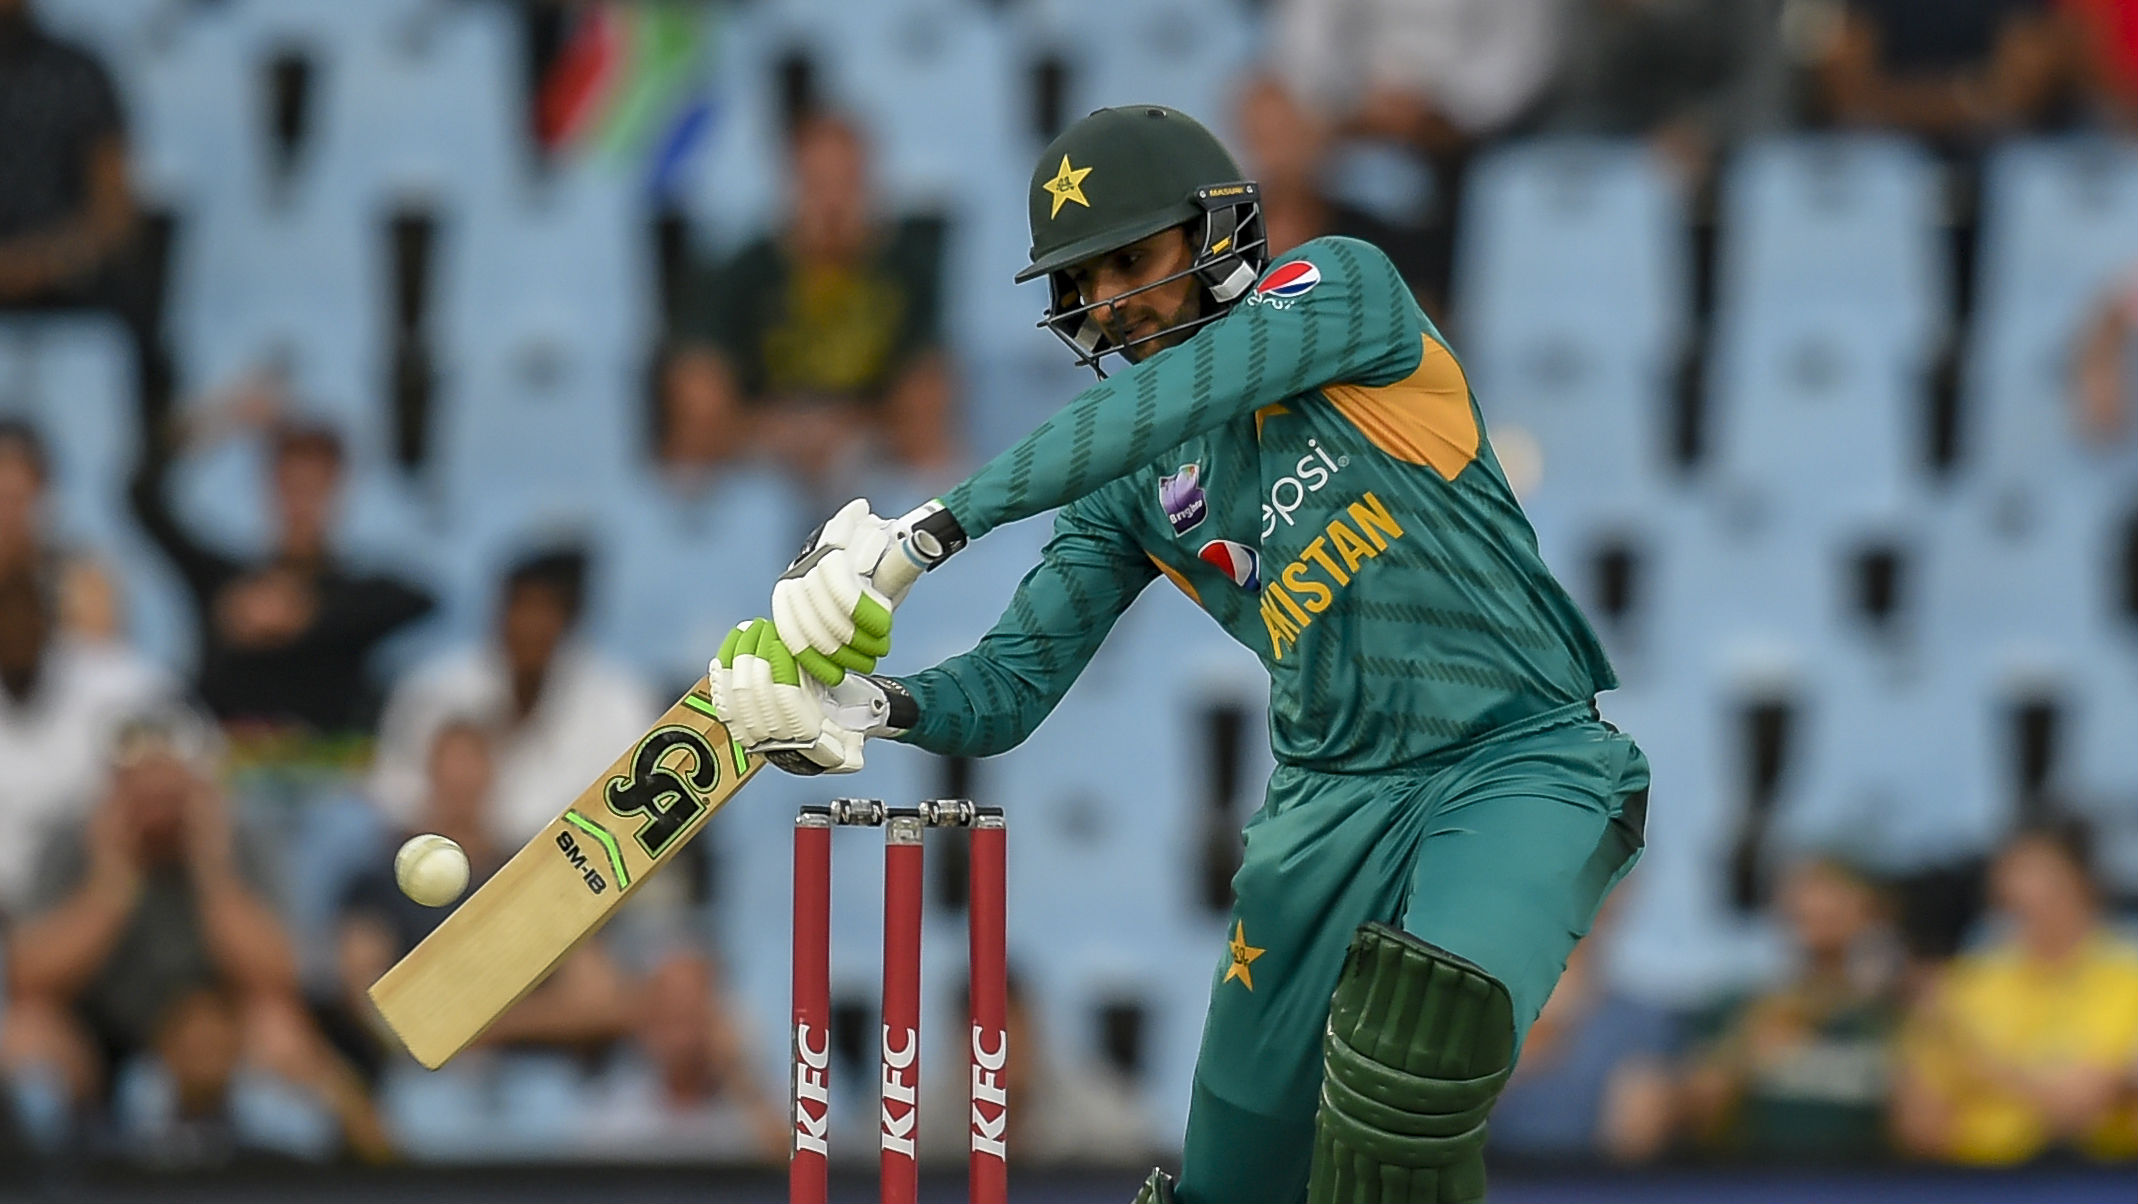 Going to play as if I'm beginning my career: Shoaib Malik's World Cup approach